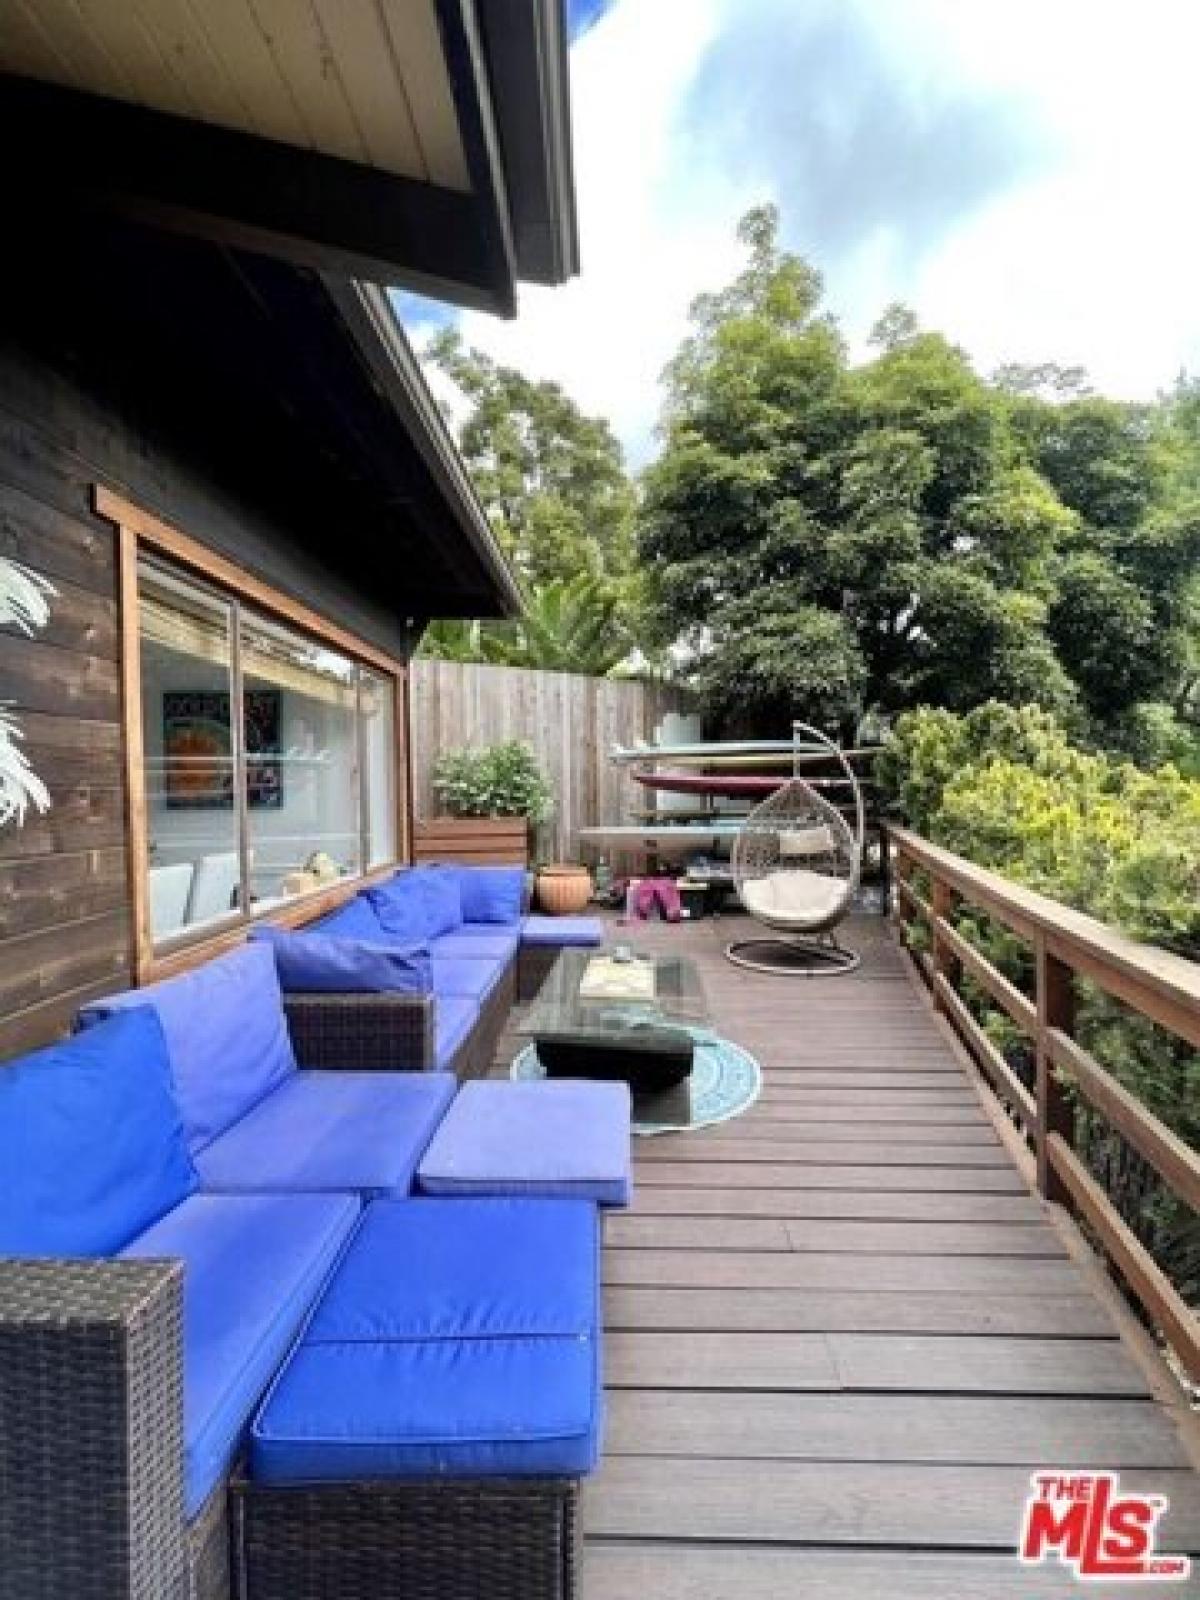 Picture of Home For Rent in Topanga, California, United States